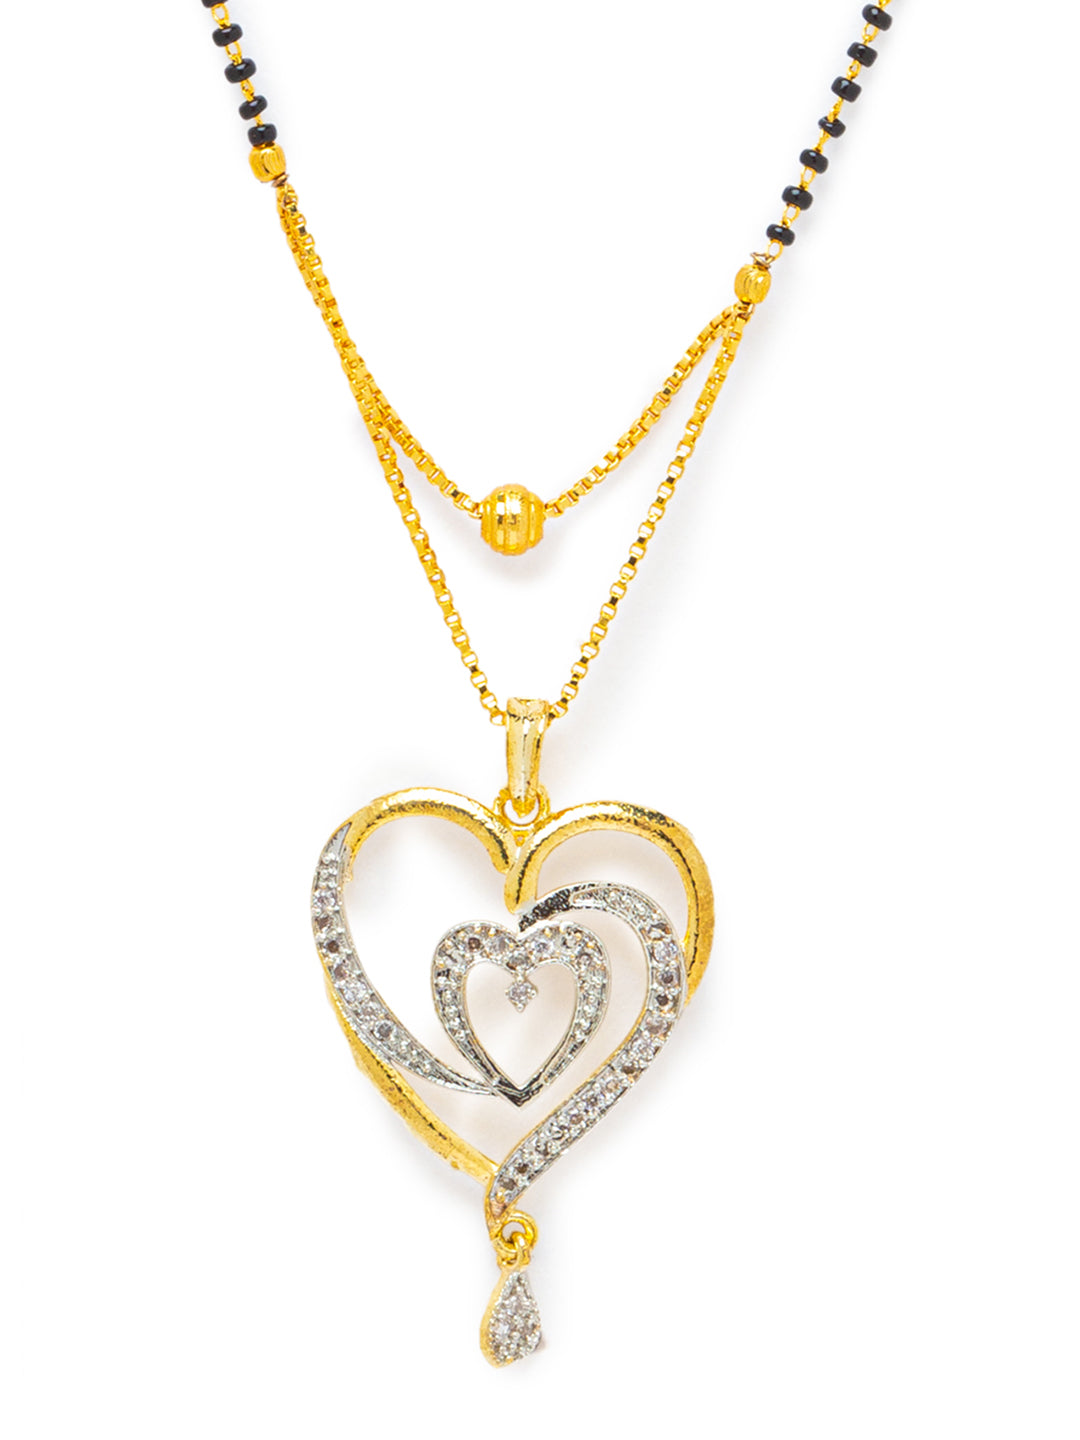 Digital Dress Room Digital Dress Room Diamond Gold Plated Short Mangalsutra set with Earrings मंगलसूत्र Latest Design/Cz Solitaire/Black Beads Chain Heart Love Shape Pendant  New Mangalsutra Designs For Women (20 Inches) 